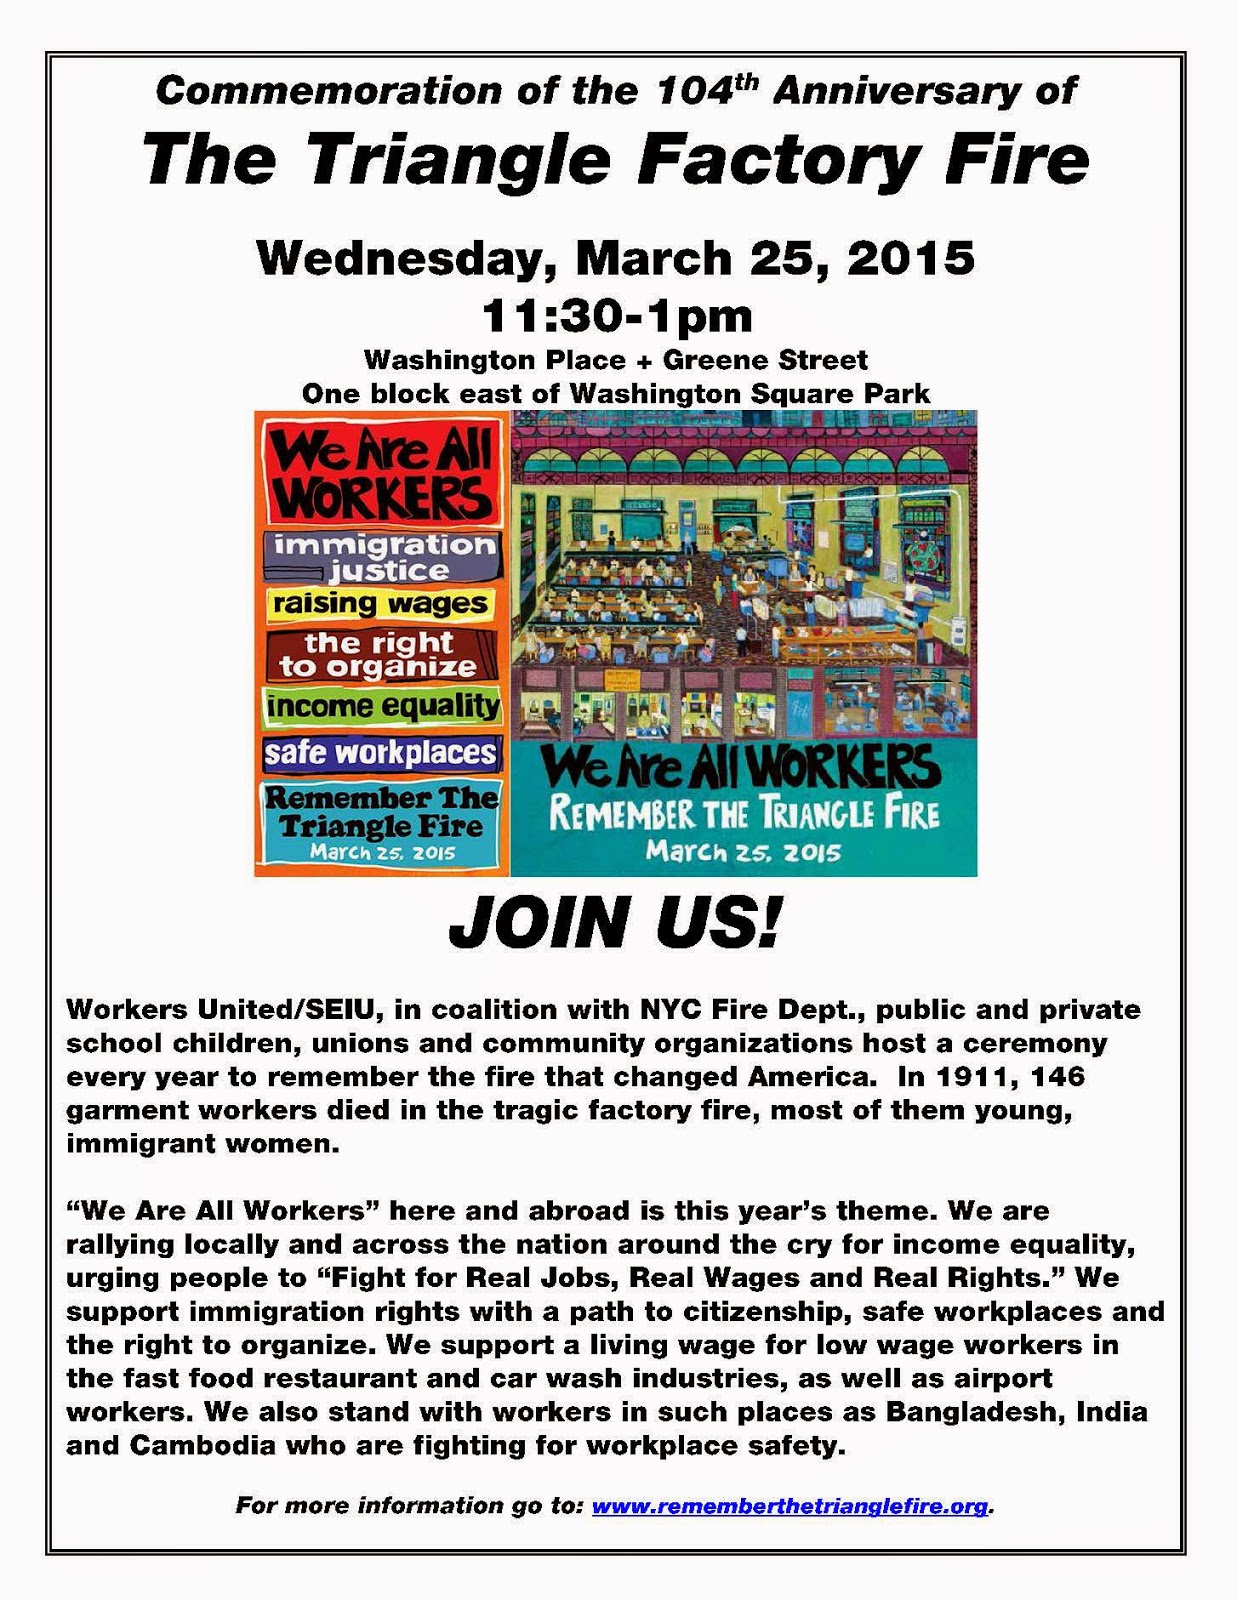 Triangle Factory Fire Commemoration Wednesday March 25, 2015